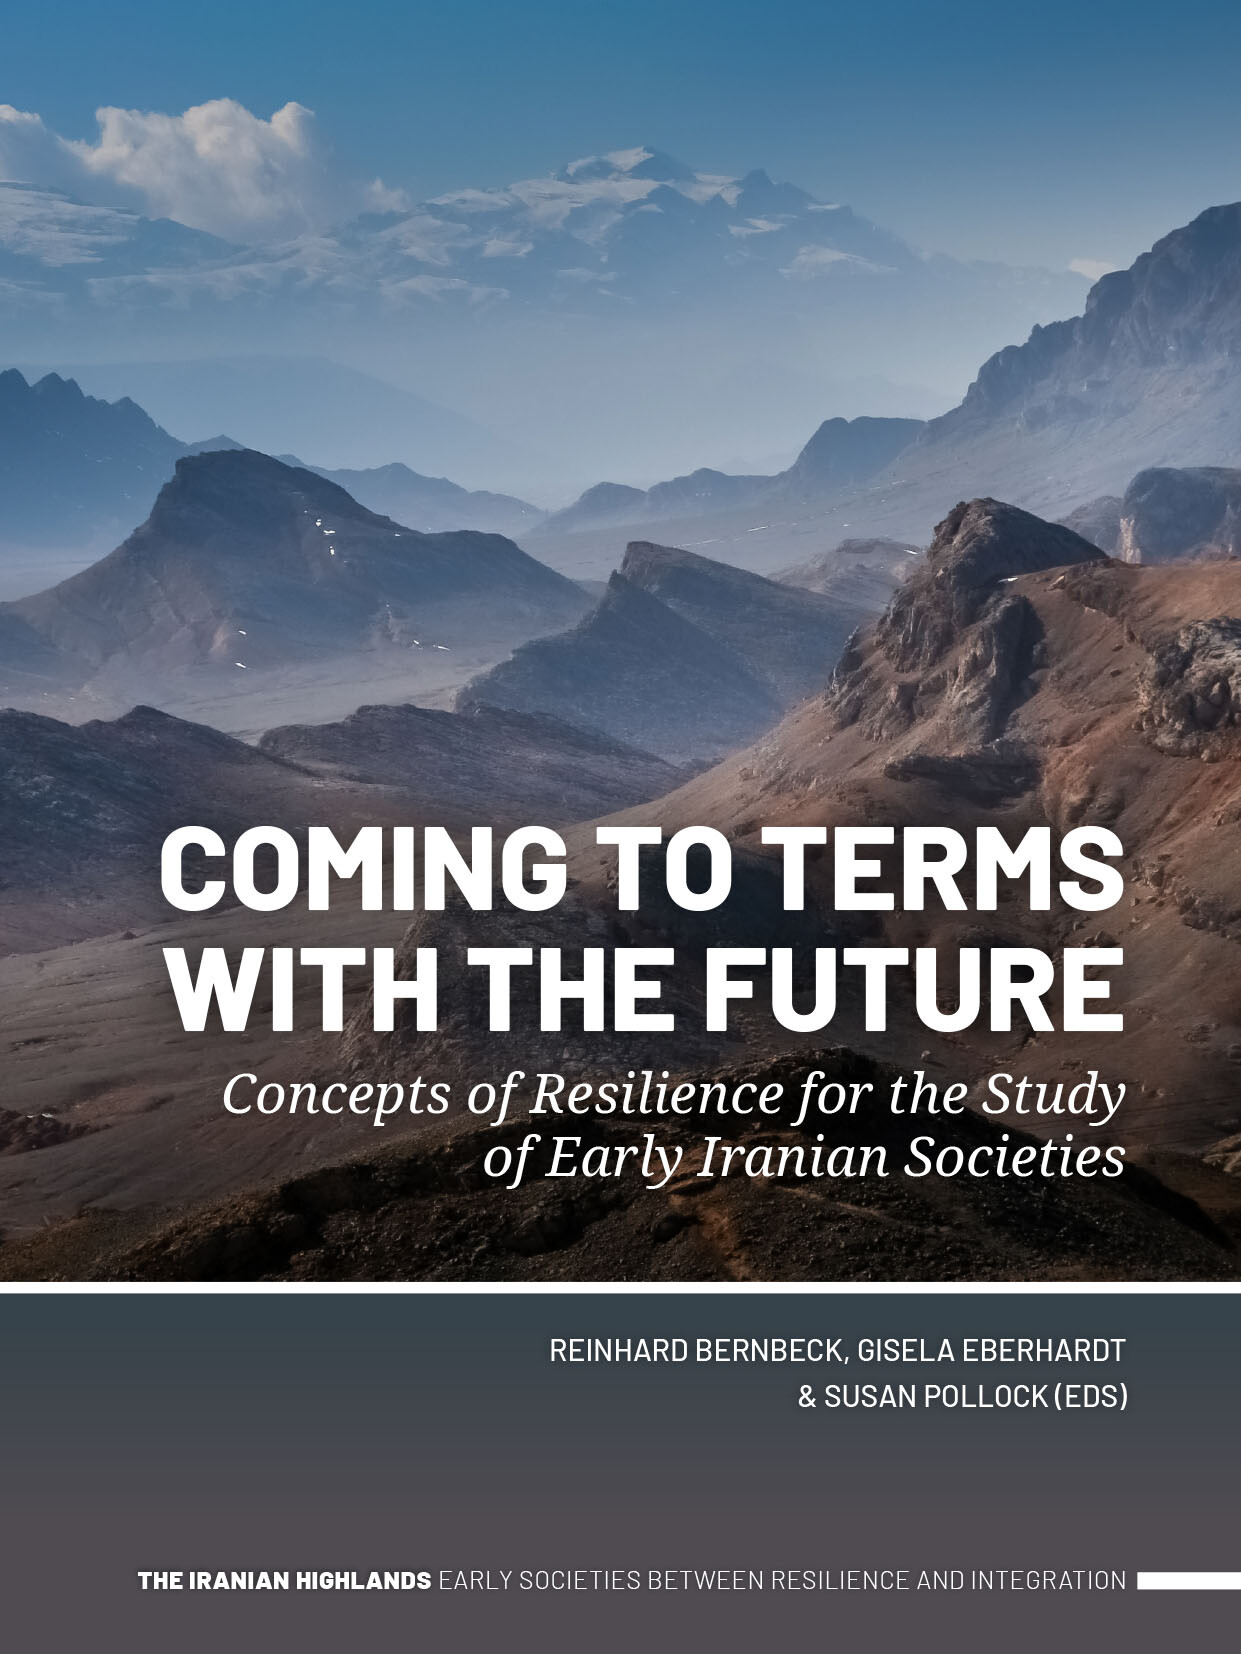 Coming to Terms with the Future. Concepts of Resilience for the Study of Early Iranian Societies